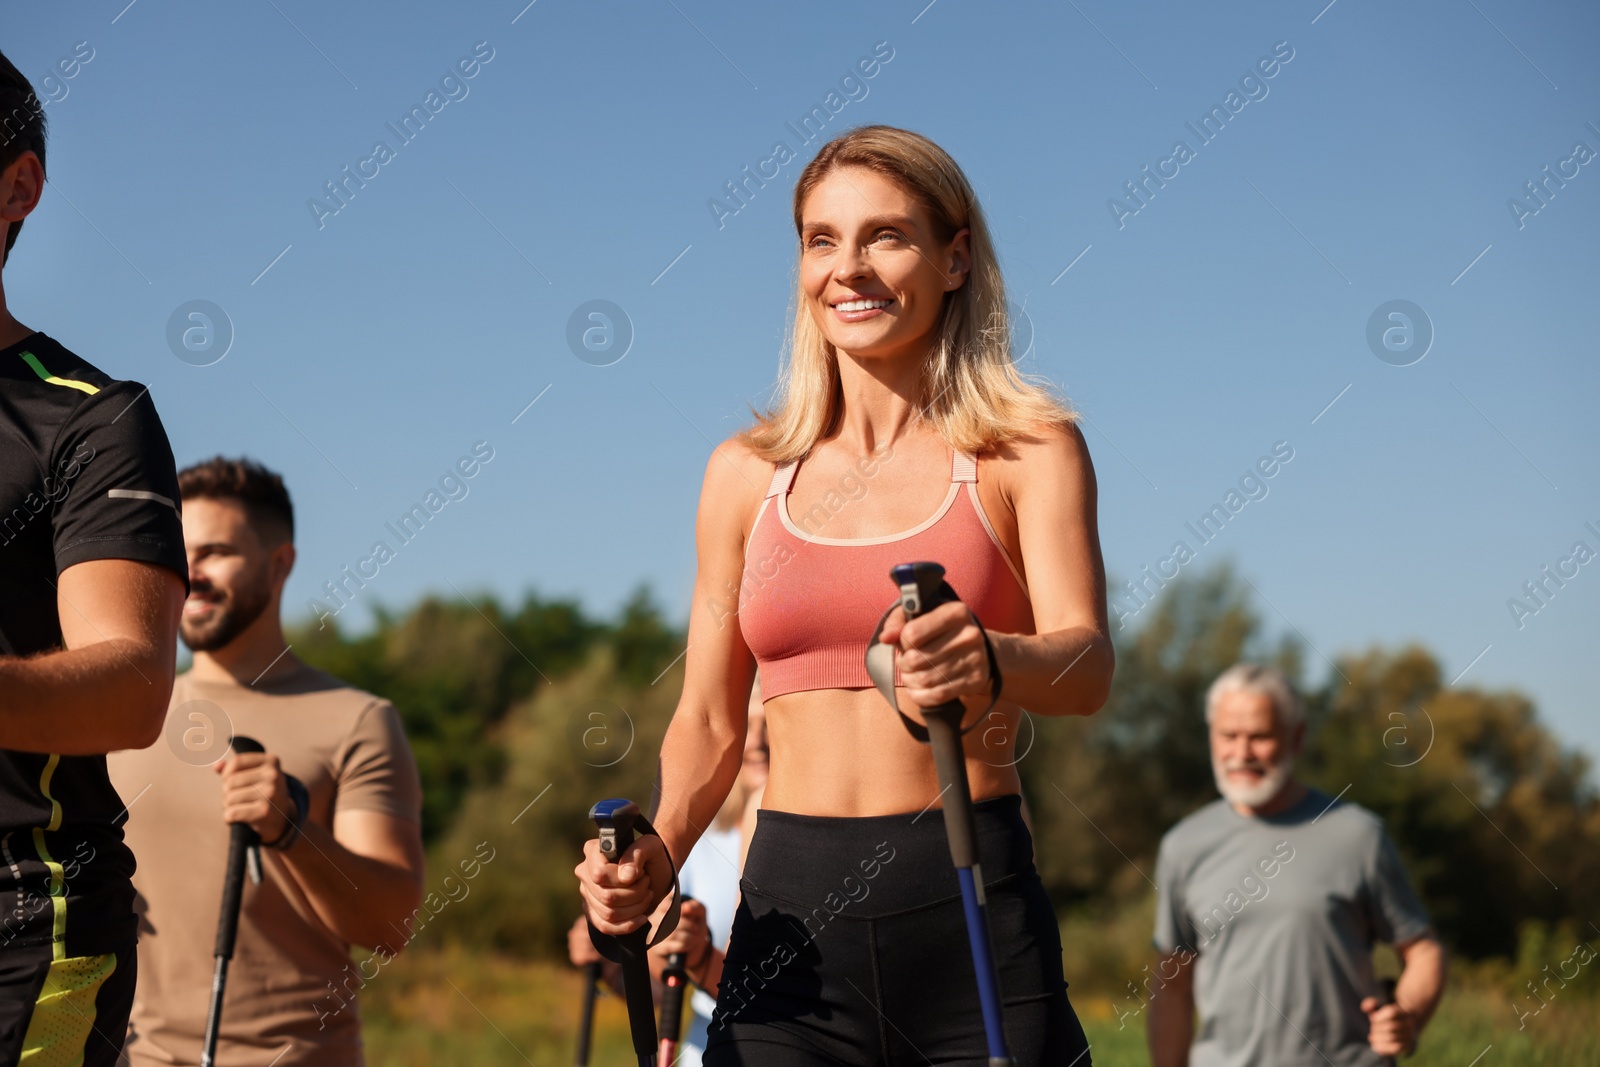 Photo of Group of happy people practicing Nordic walking with poles outdoors on sunny day